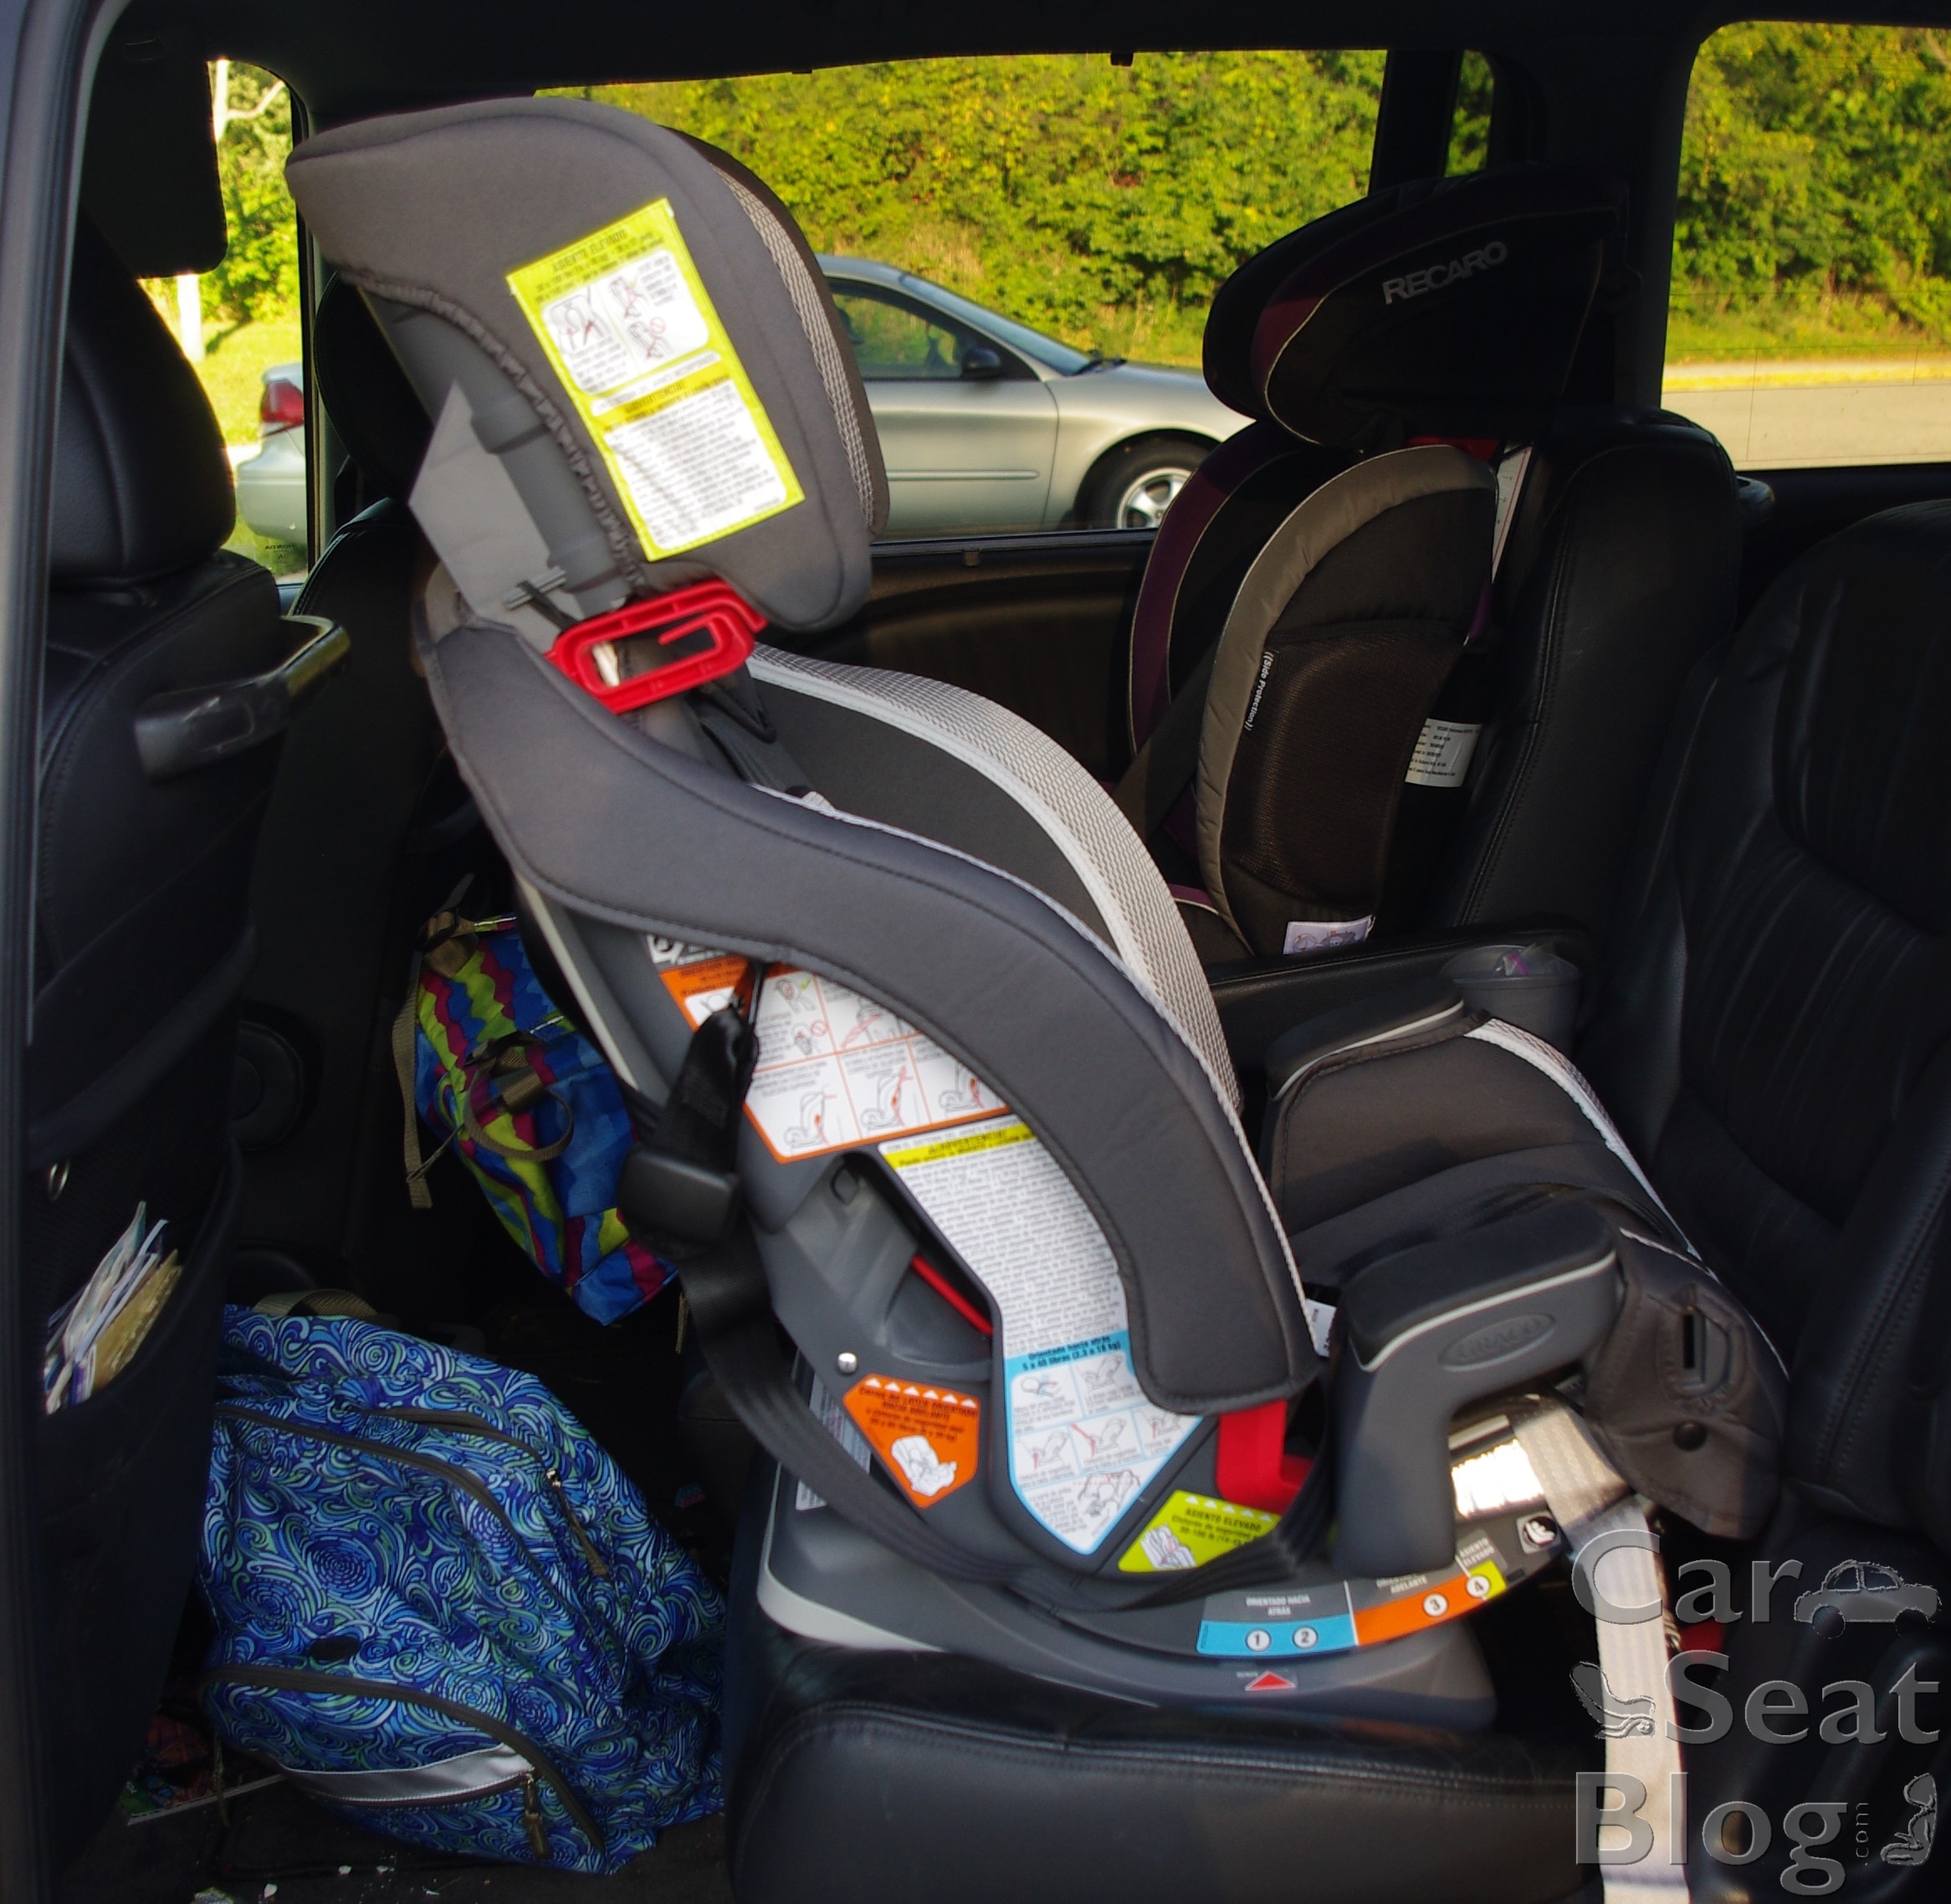 Carseatblog The Most Trusted Source For Car Seat Reviews Ratings Deals And News